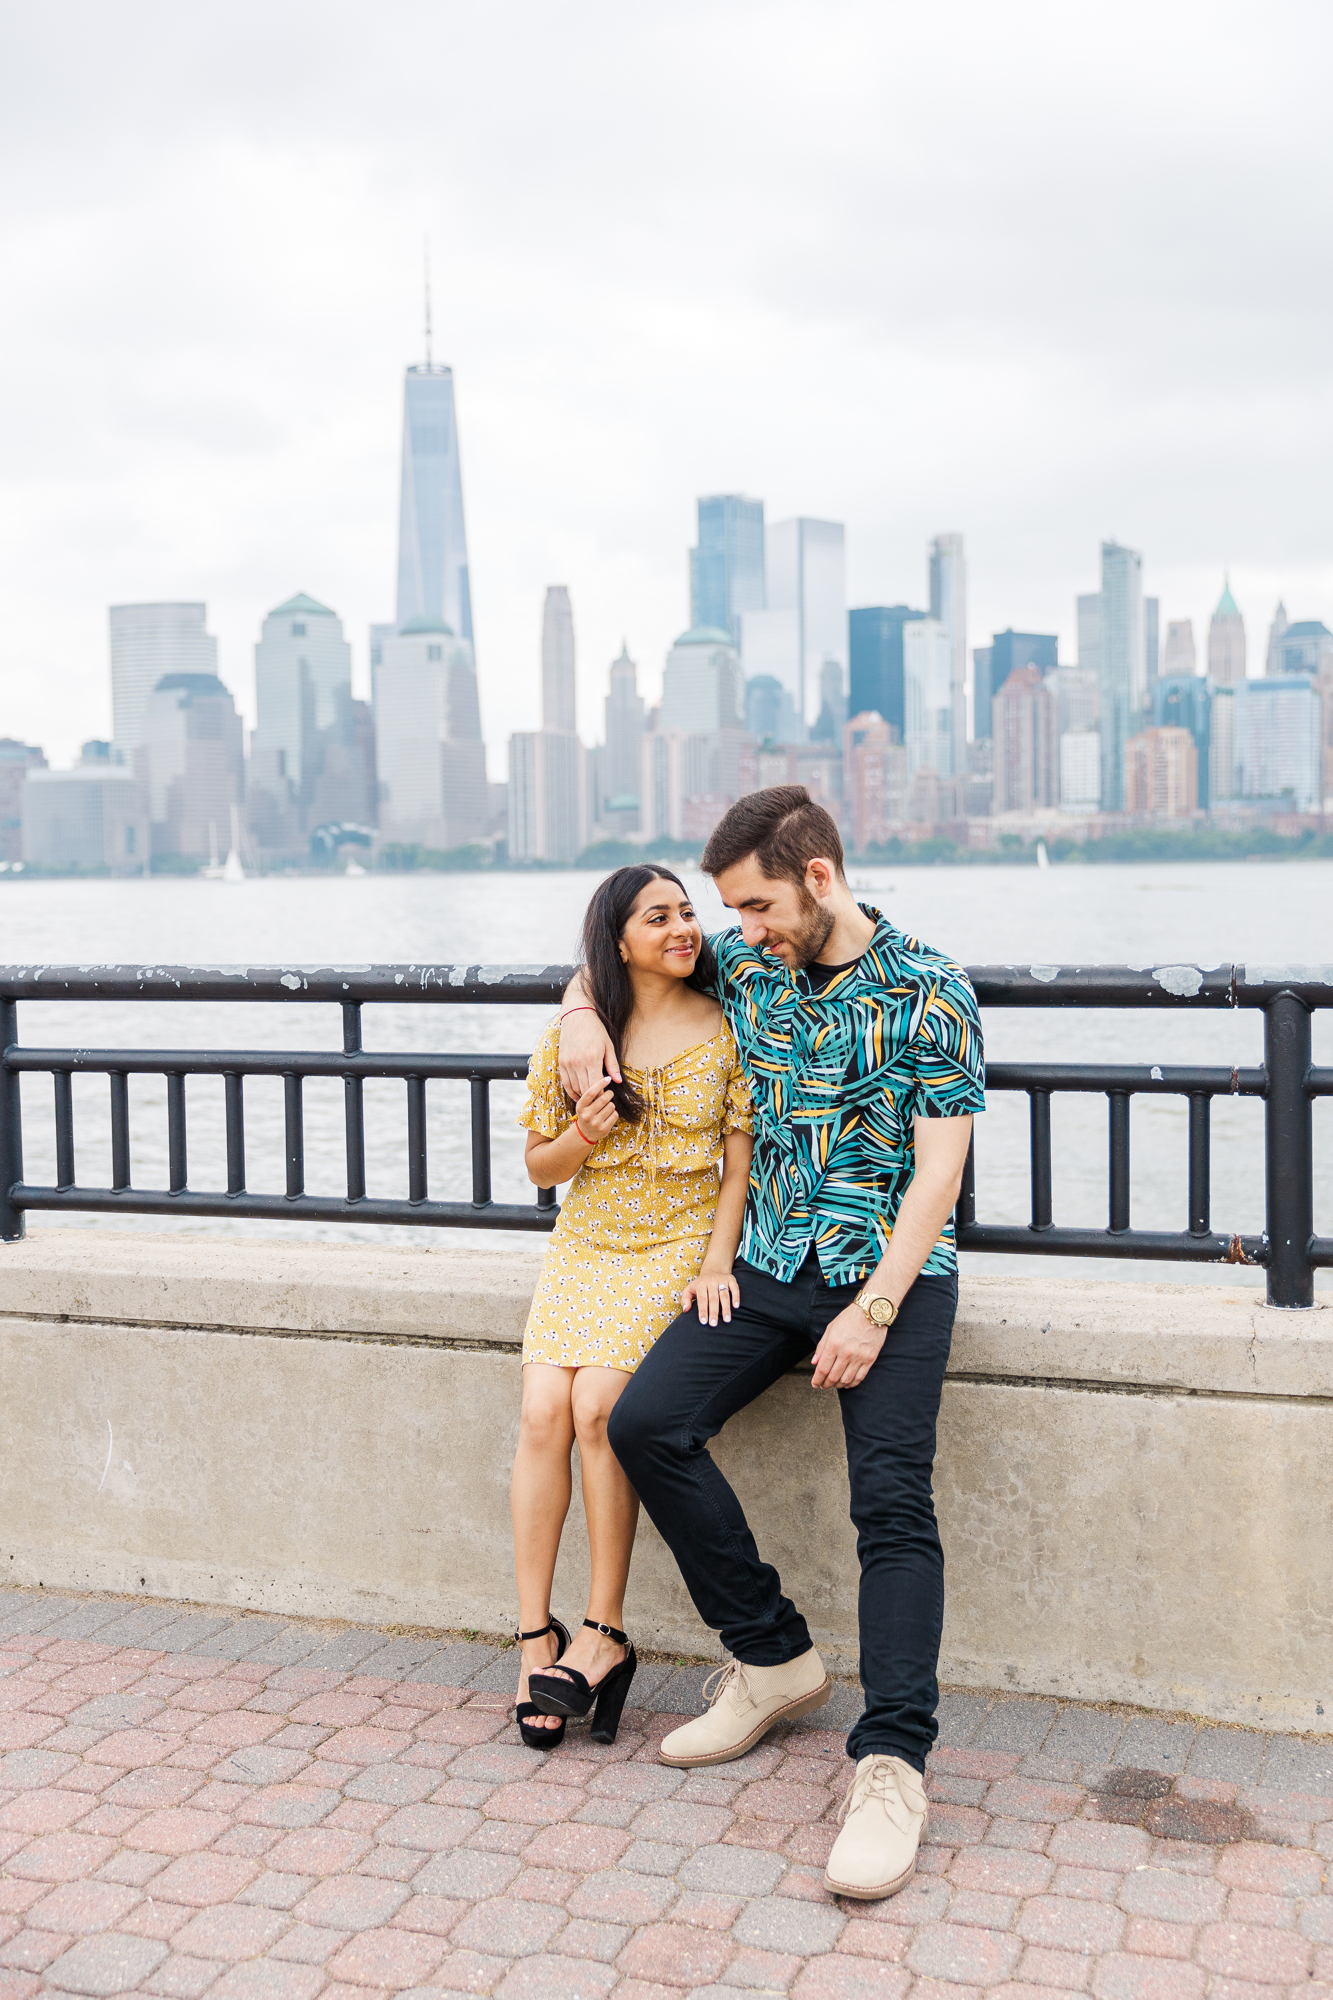 Spectacular Overcast Liberty State Park Engagement Photography